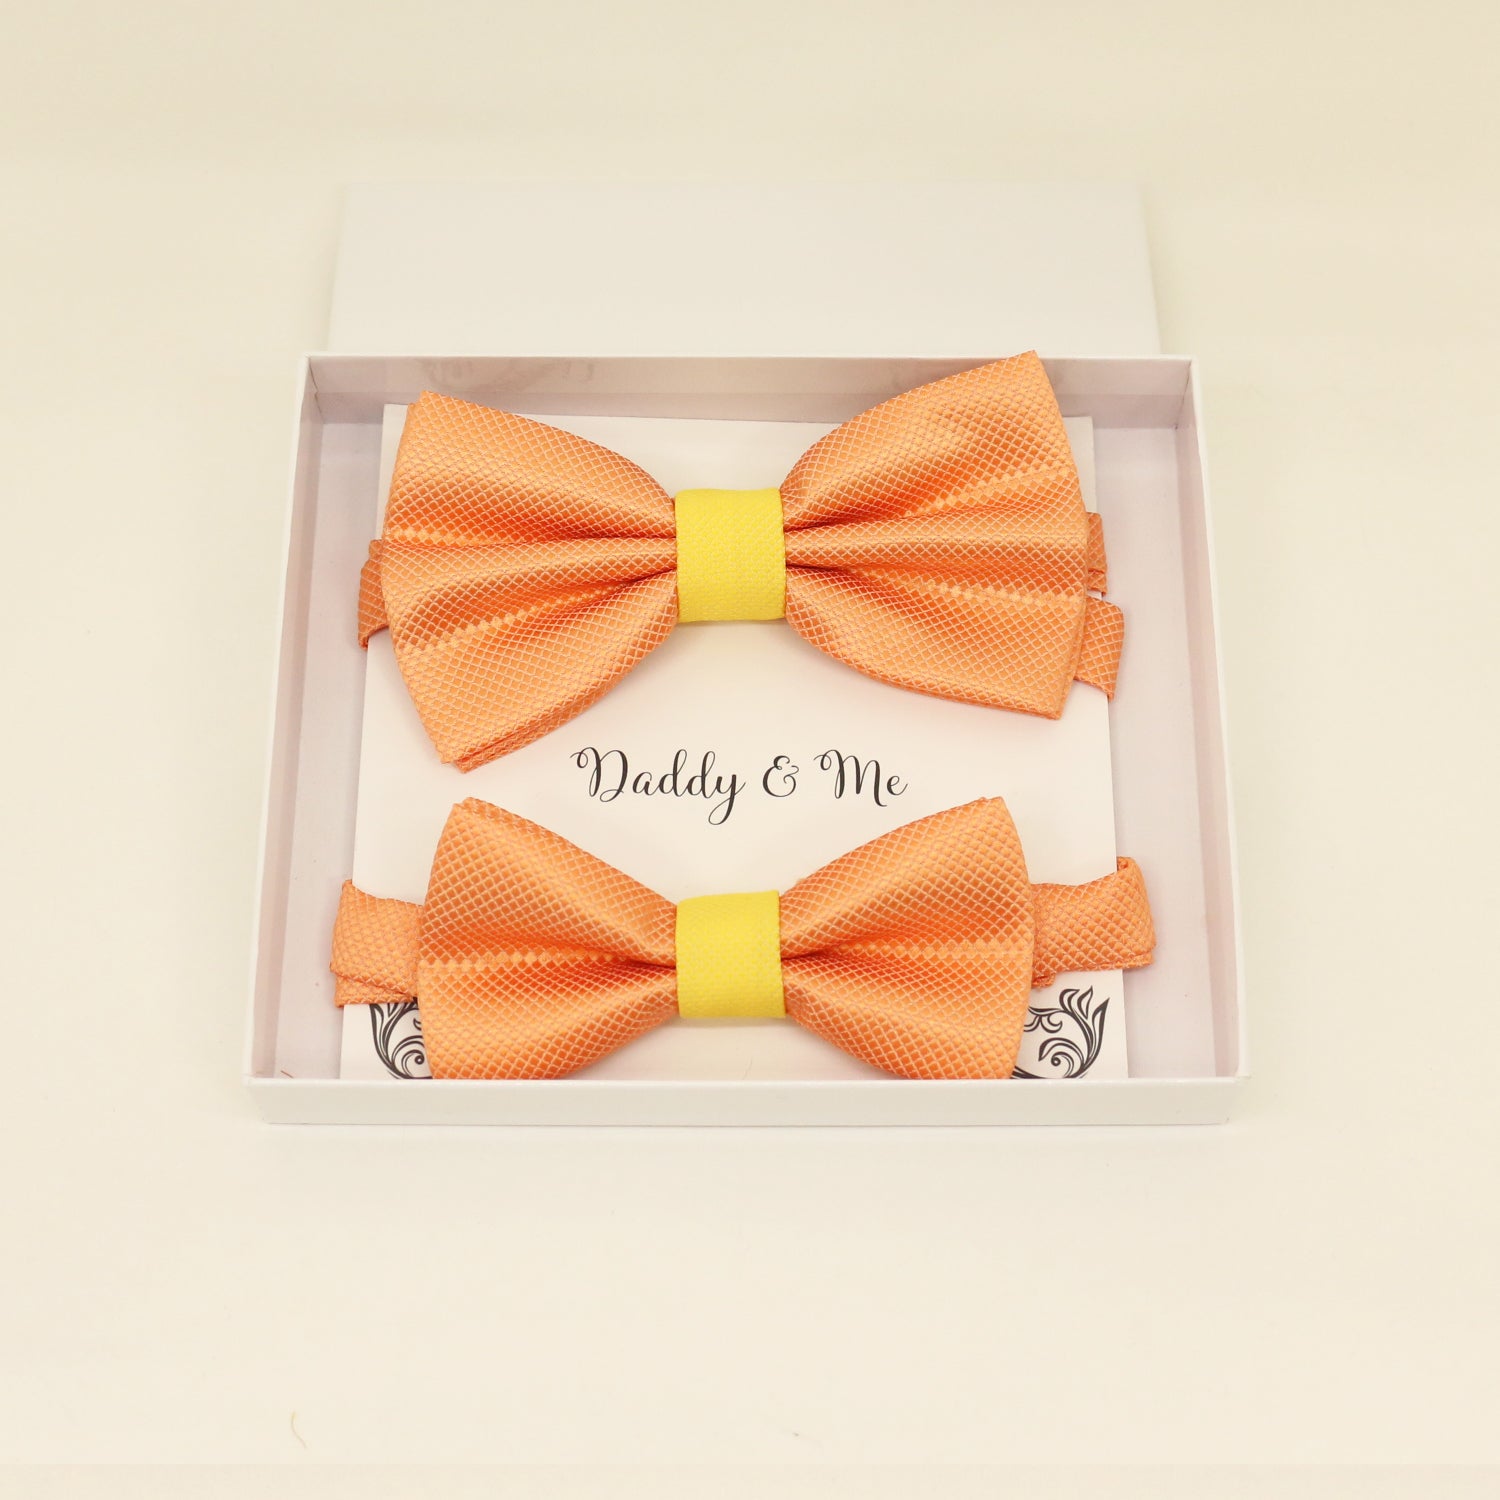 Orange Yellow Bow tie set for daddy and son, Daddy and me bow tie gift set, Grandpa me, Orange yellow Kids bow, Orange and Yellow, handmade